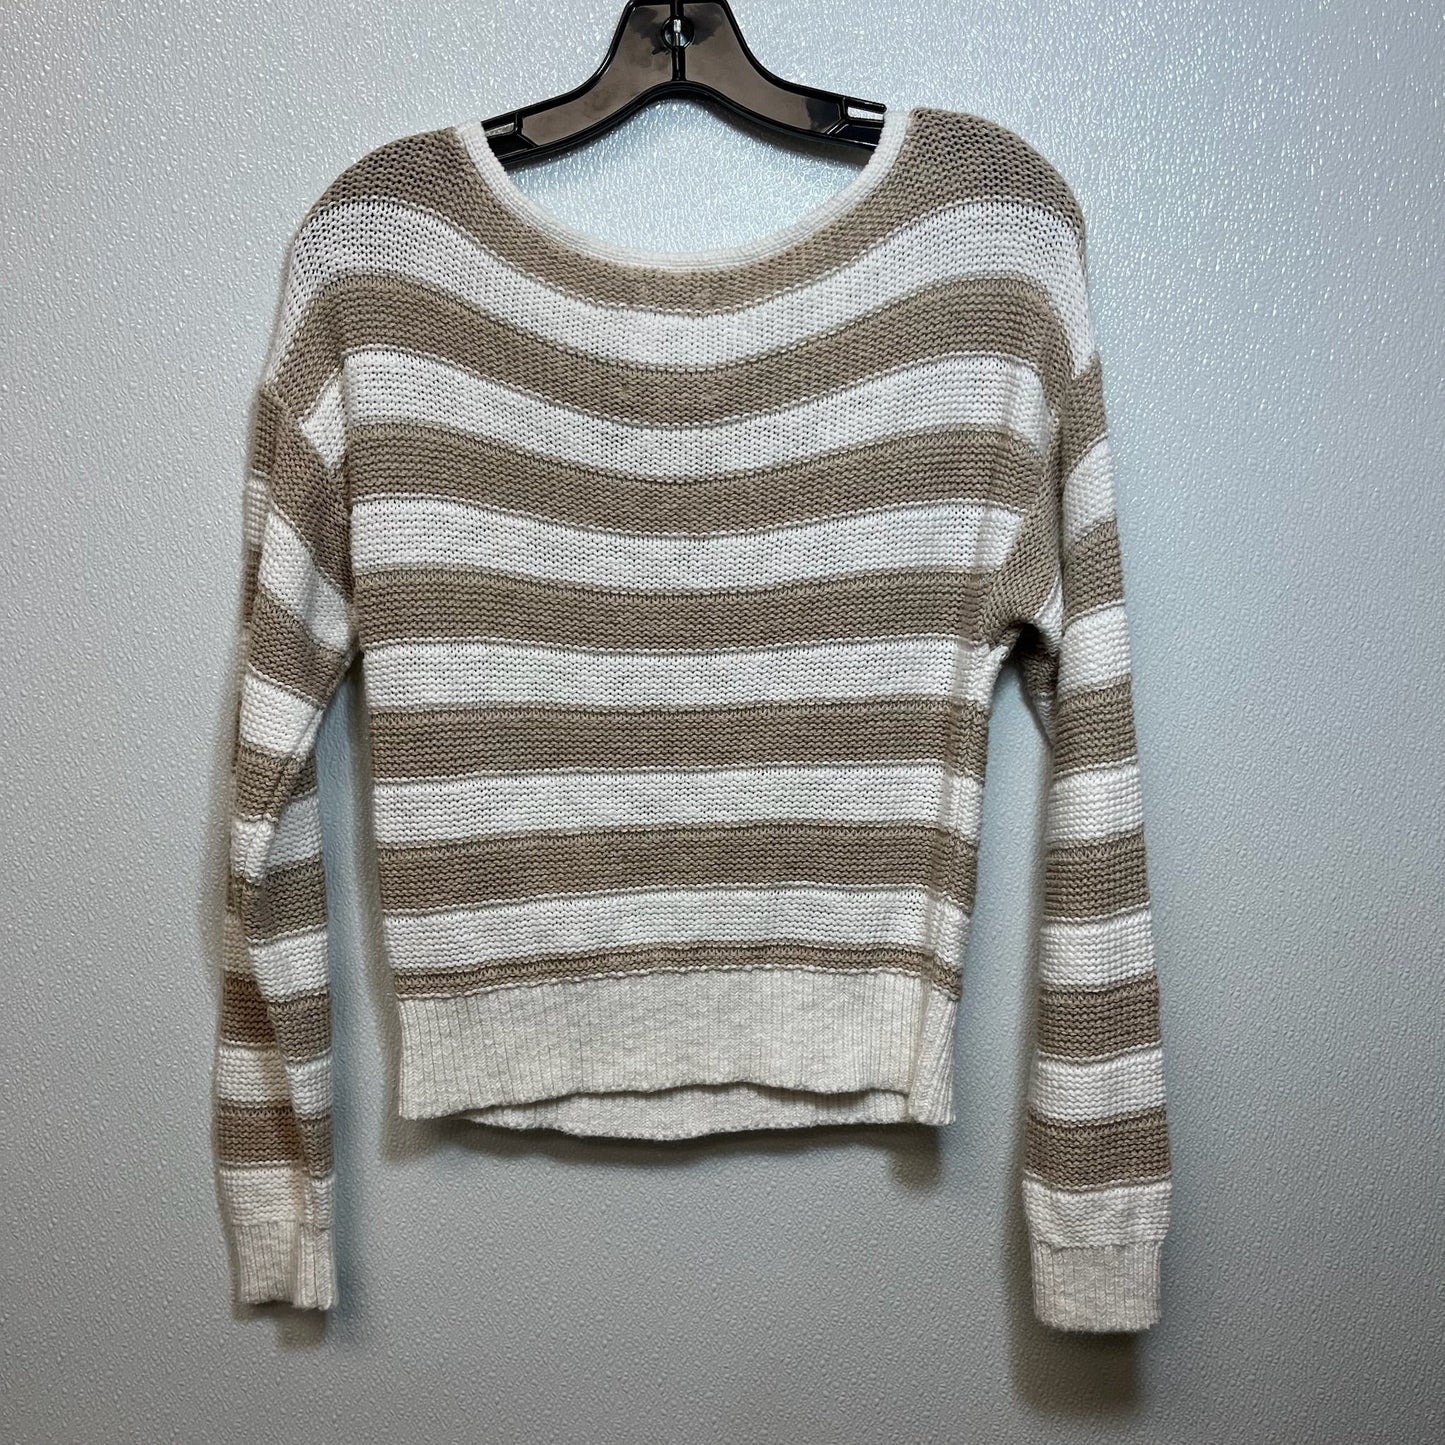 Sweater By Abercrombie And Fitch  Size: Xs